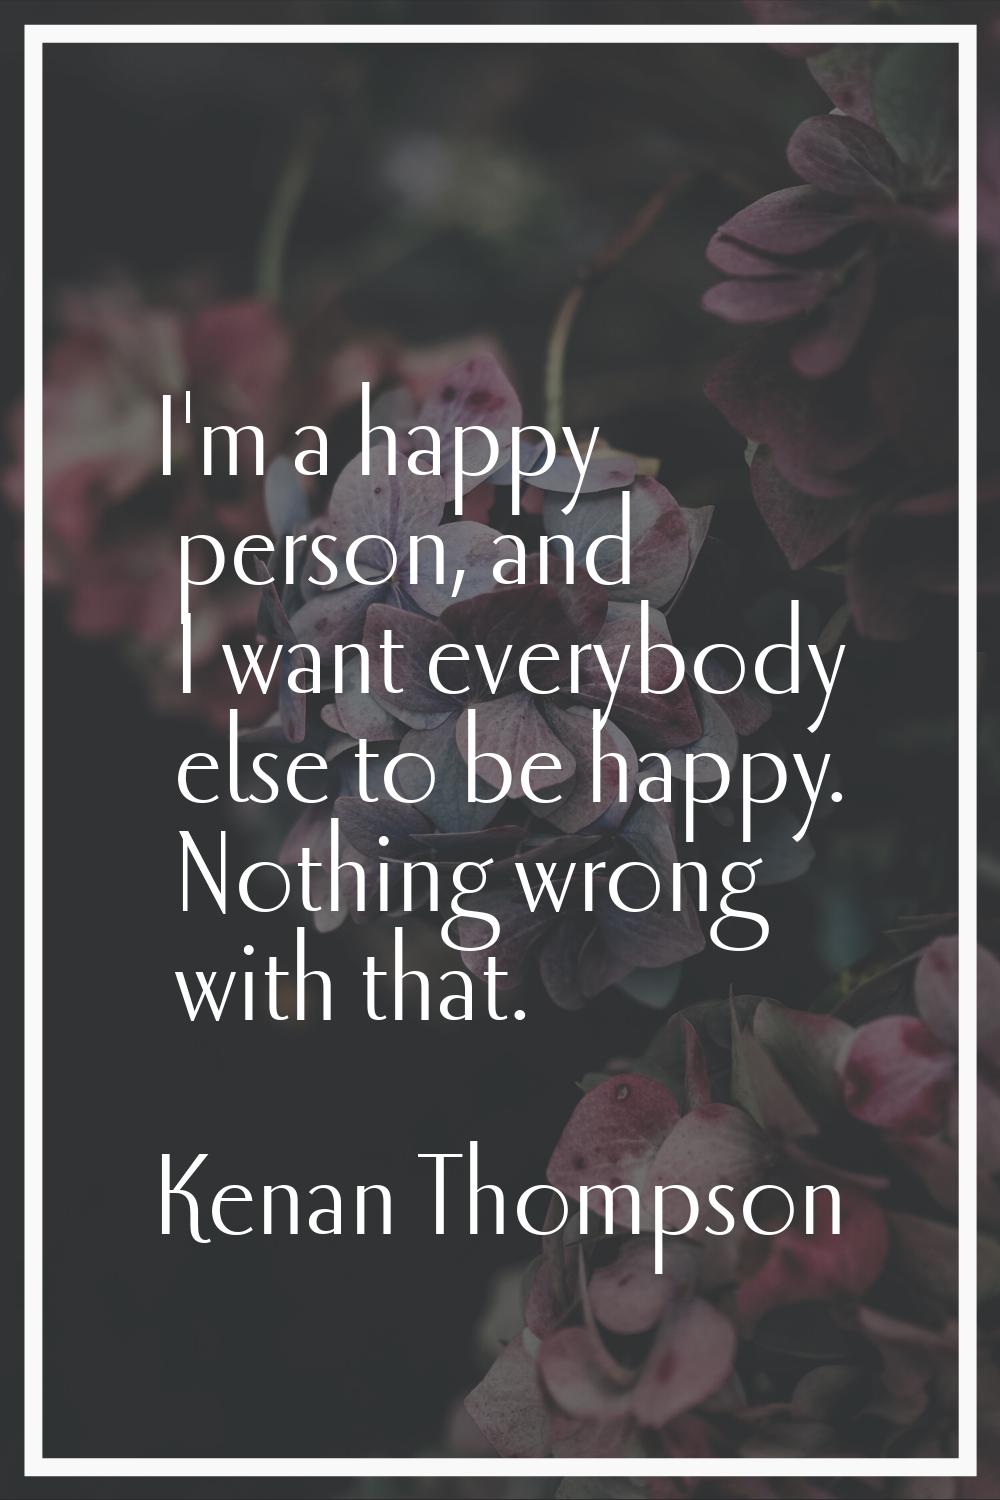 I'm a happy person, and I want everybody else to be happy. Nothing wrong with that.